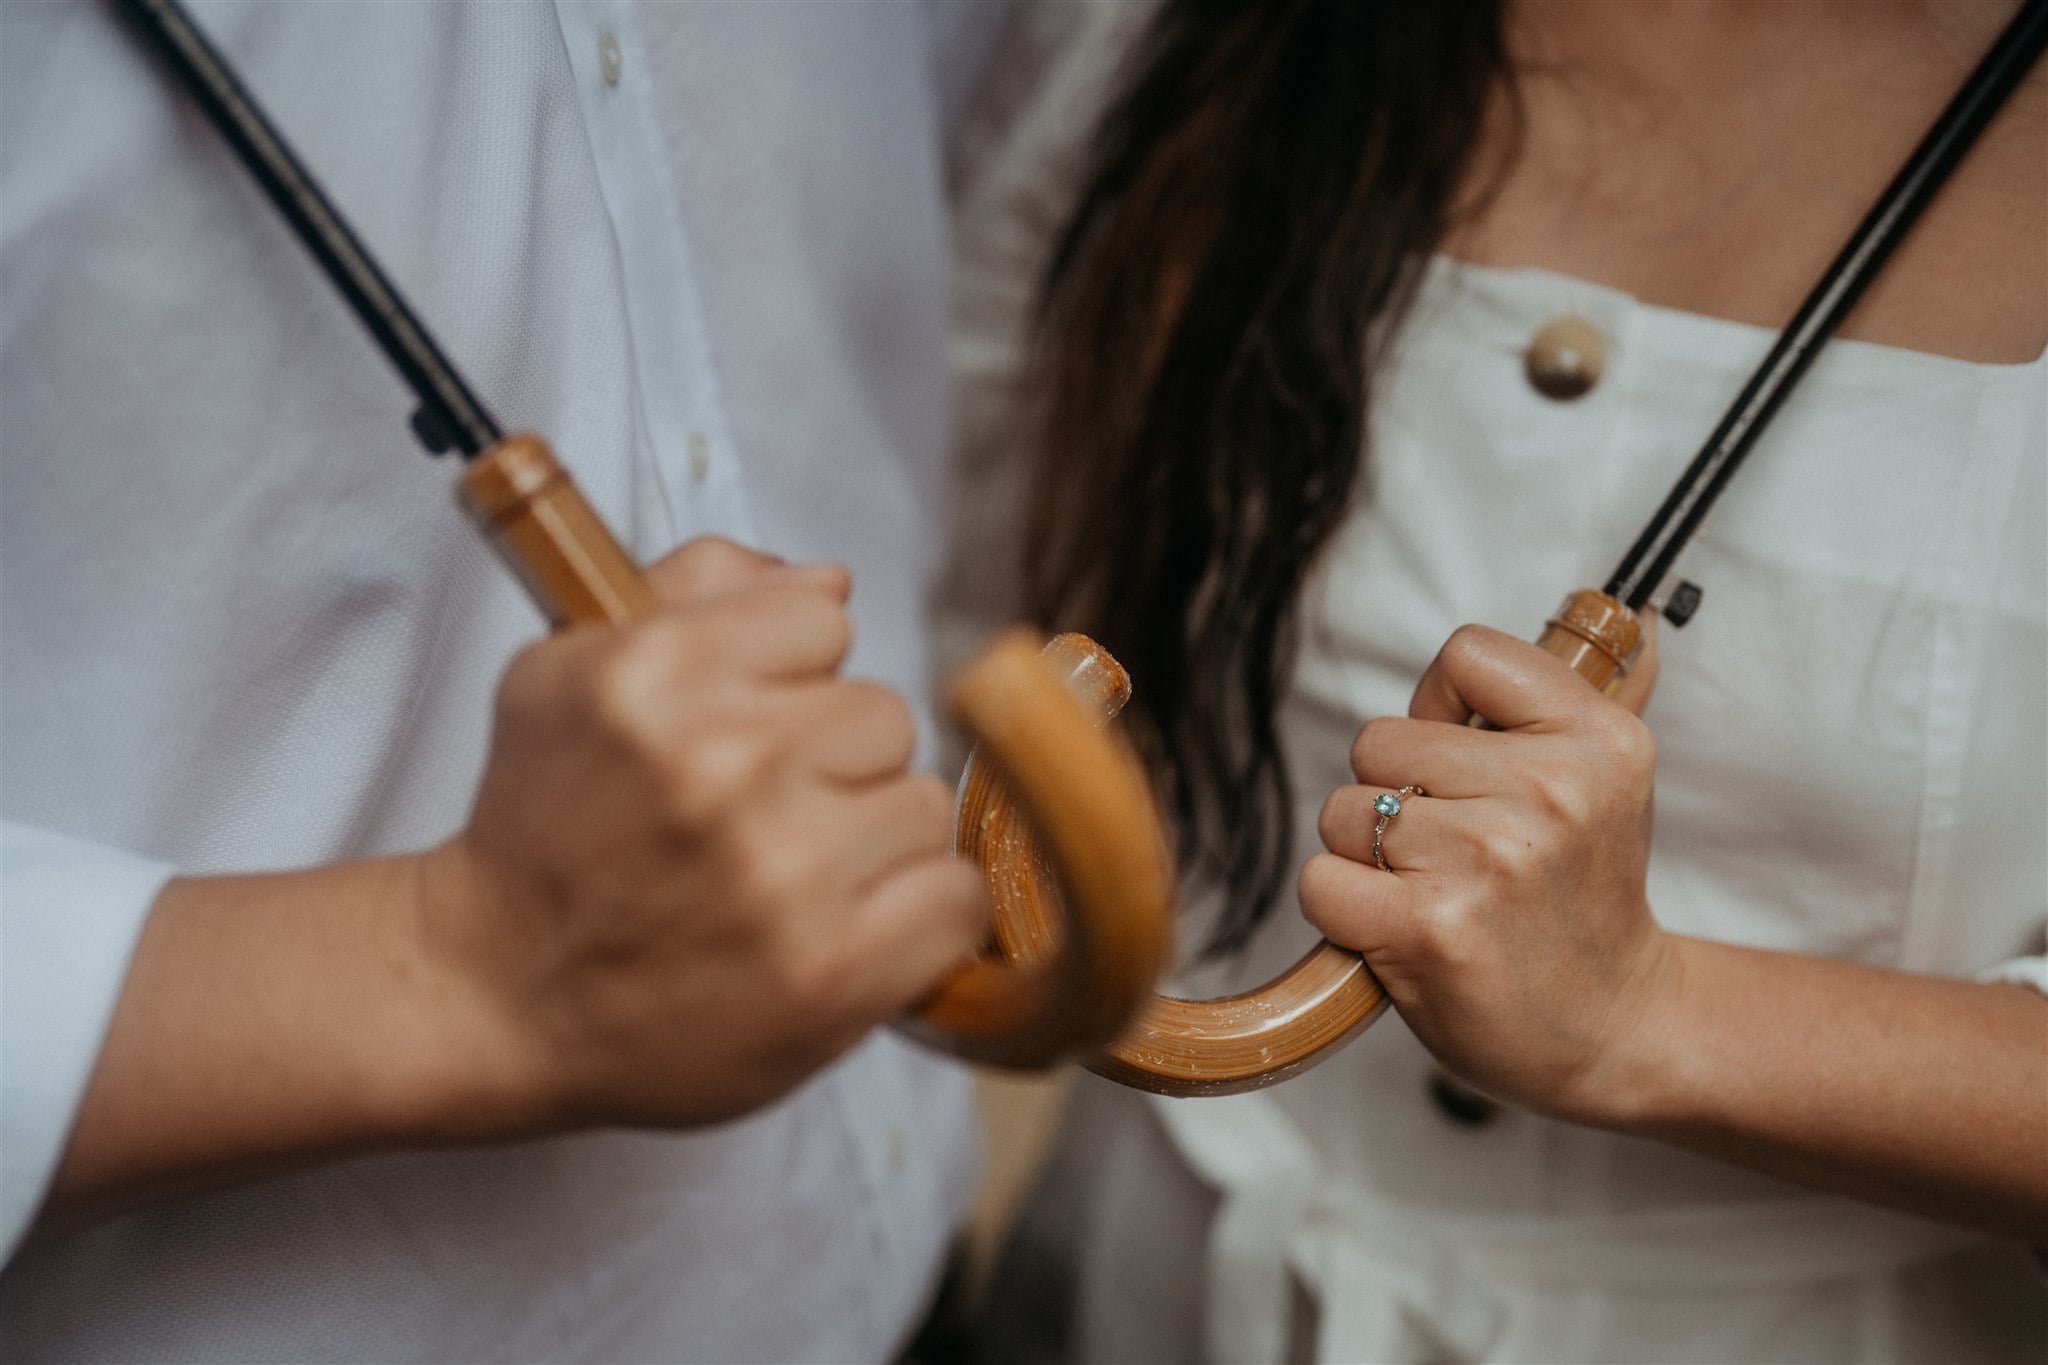 Bride and groom holding umbrellas with wood handles